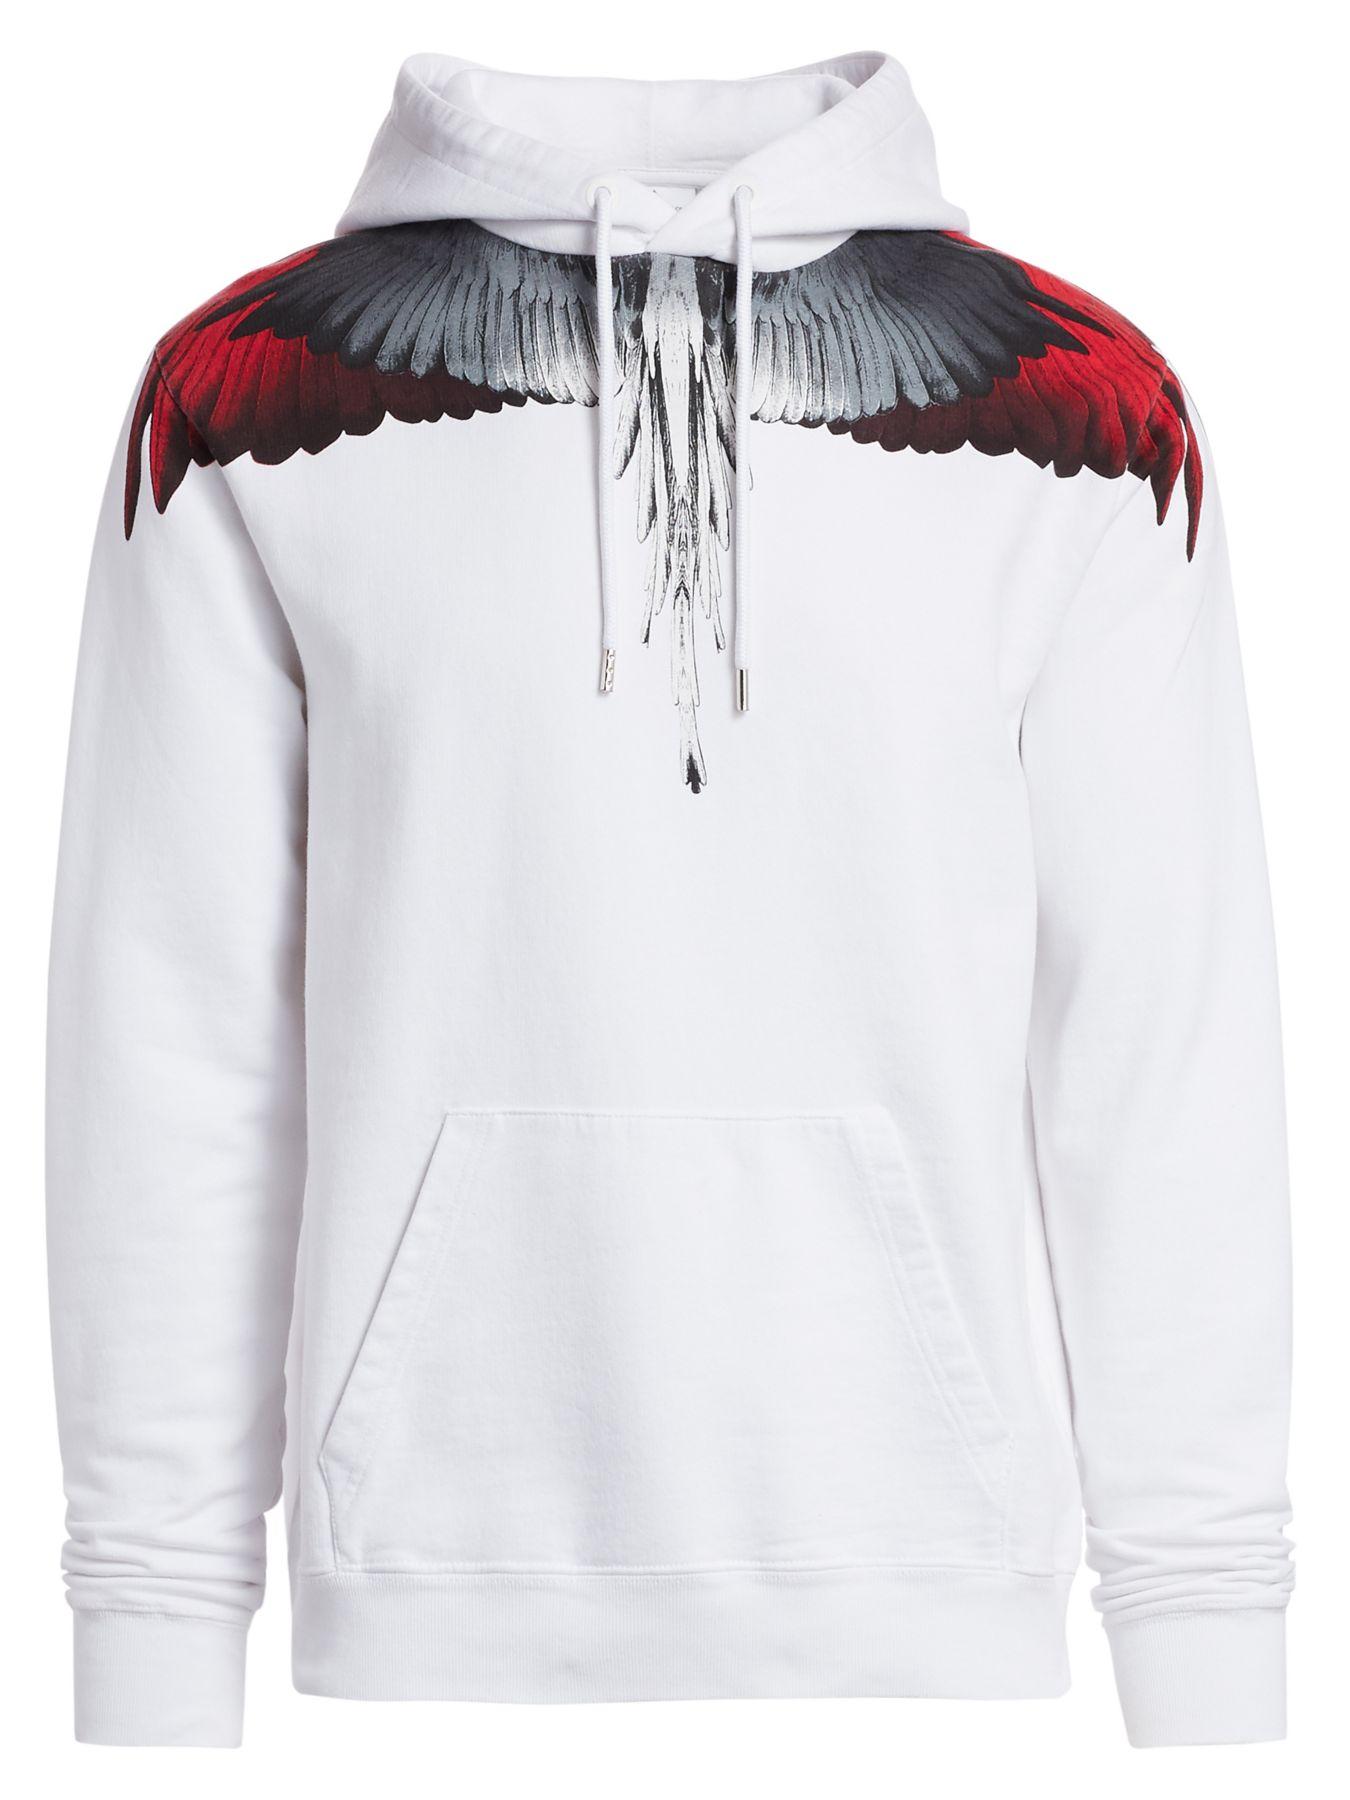 Marcelo Burlon Wings Cotton Hoodie in White Red (White) for Men - Save ...